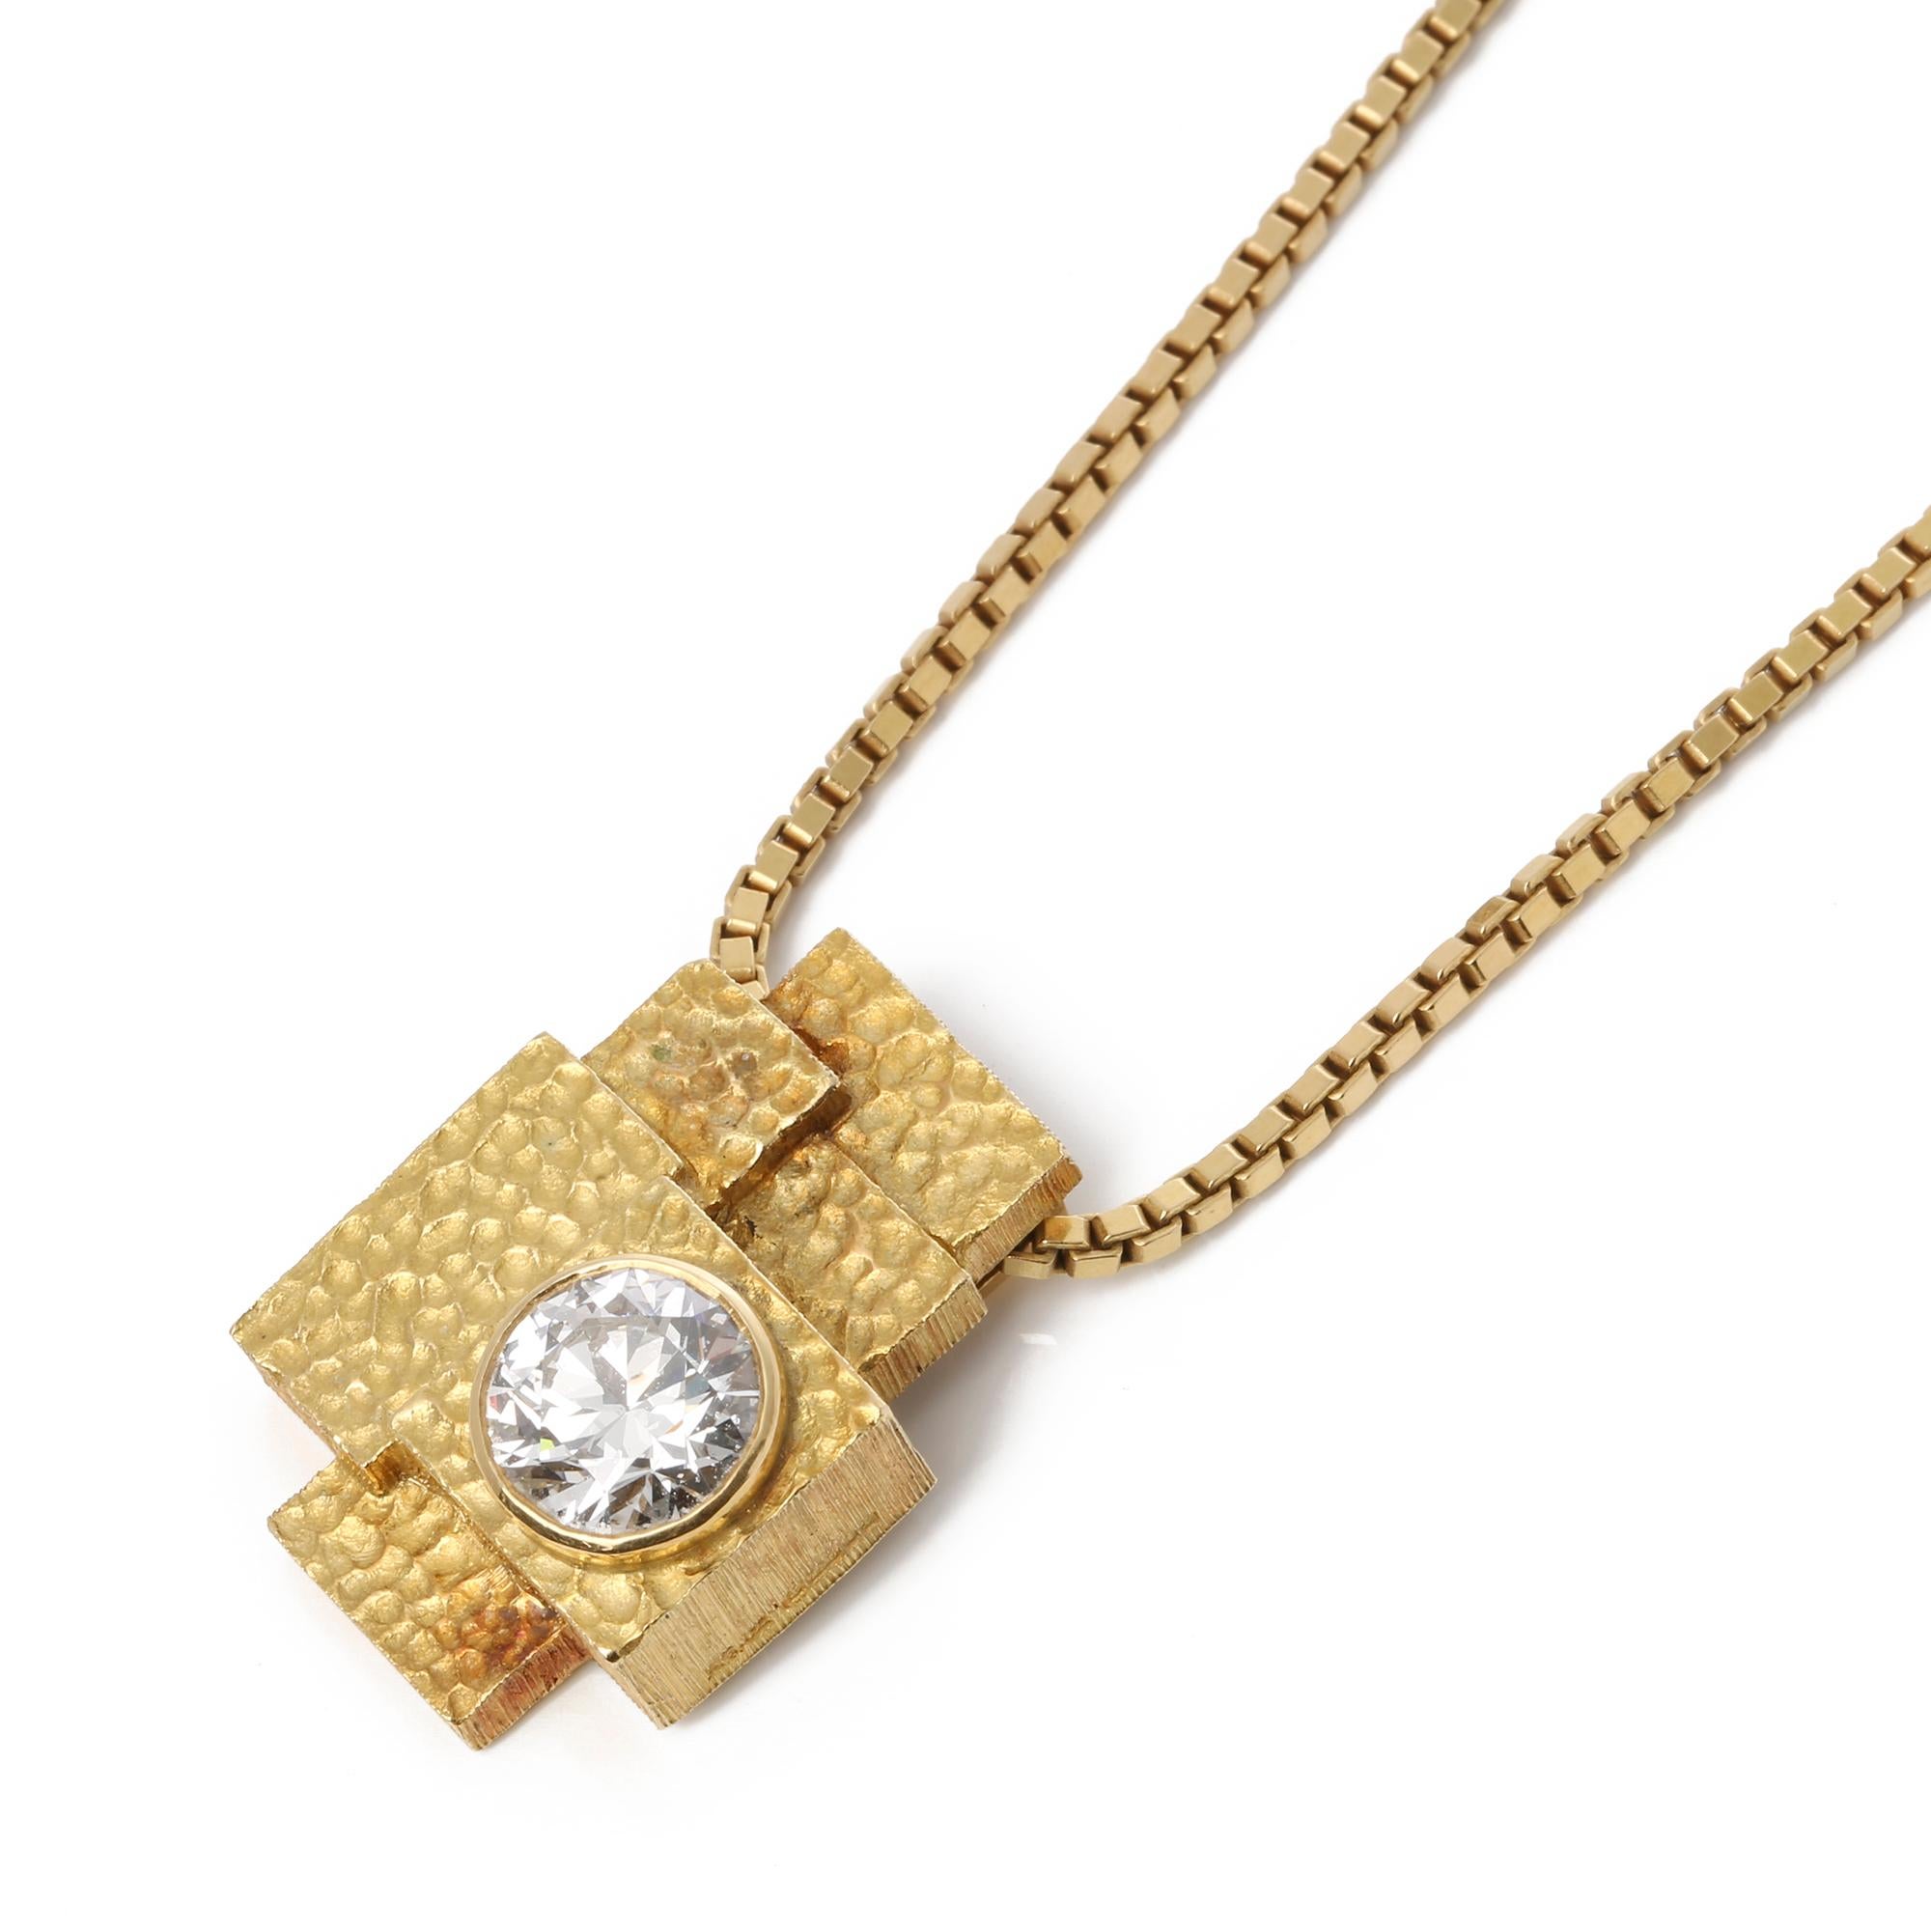 This pendant by Grima dates from 1986 and is a bespoke piece that was designed for its previous owner to showcase the heriloom diamond. The 2.18ct diamond is set within an 18ct gold abstract mount with a signature textured finish and finished with